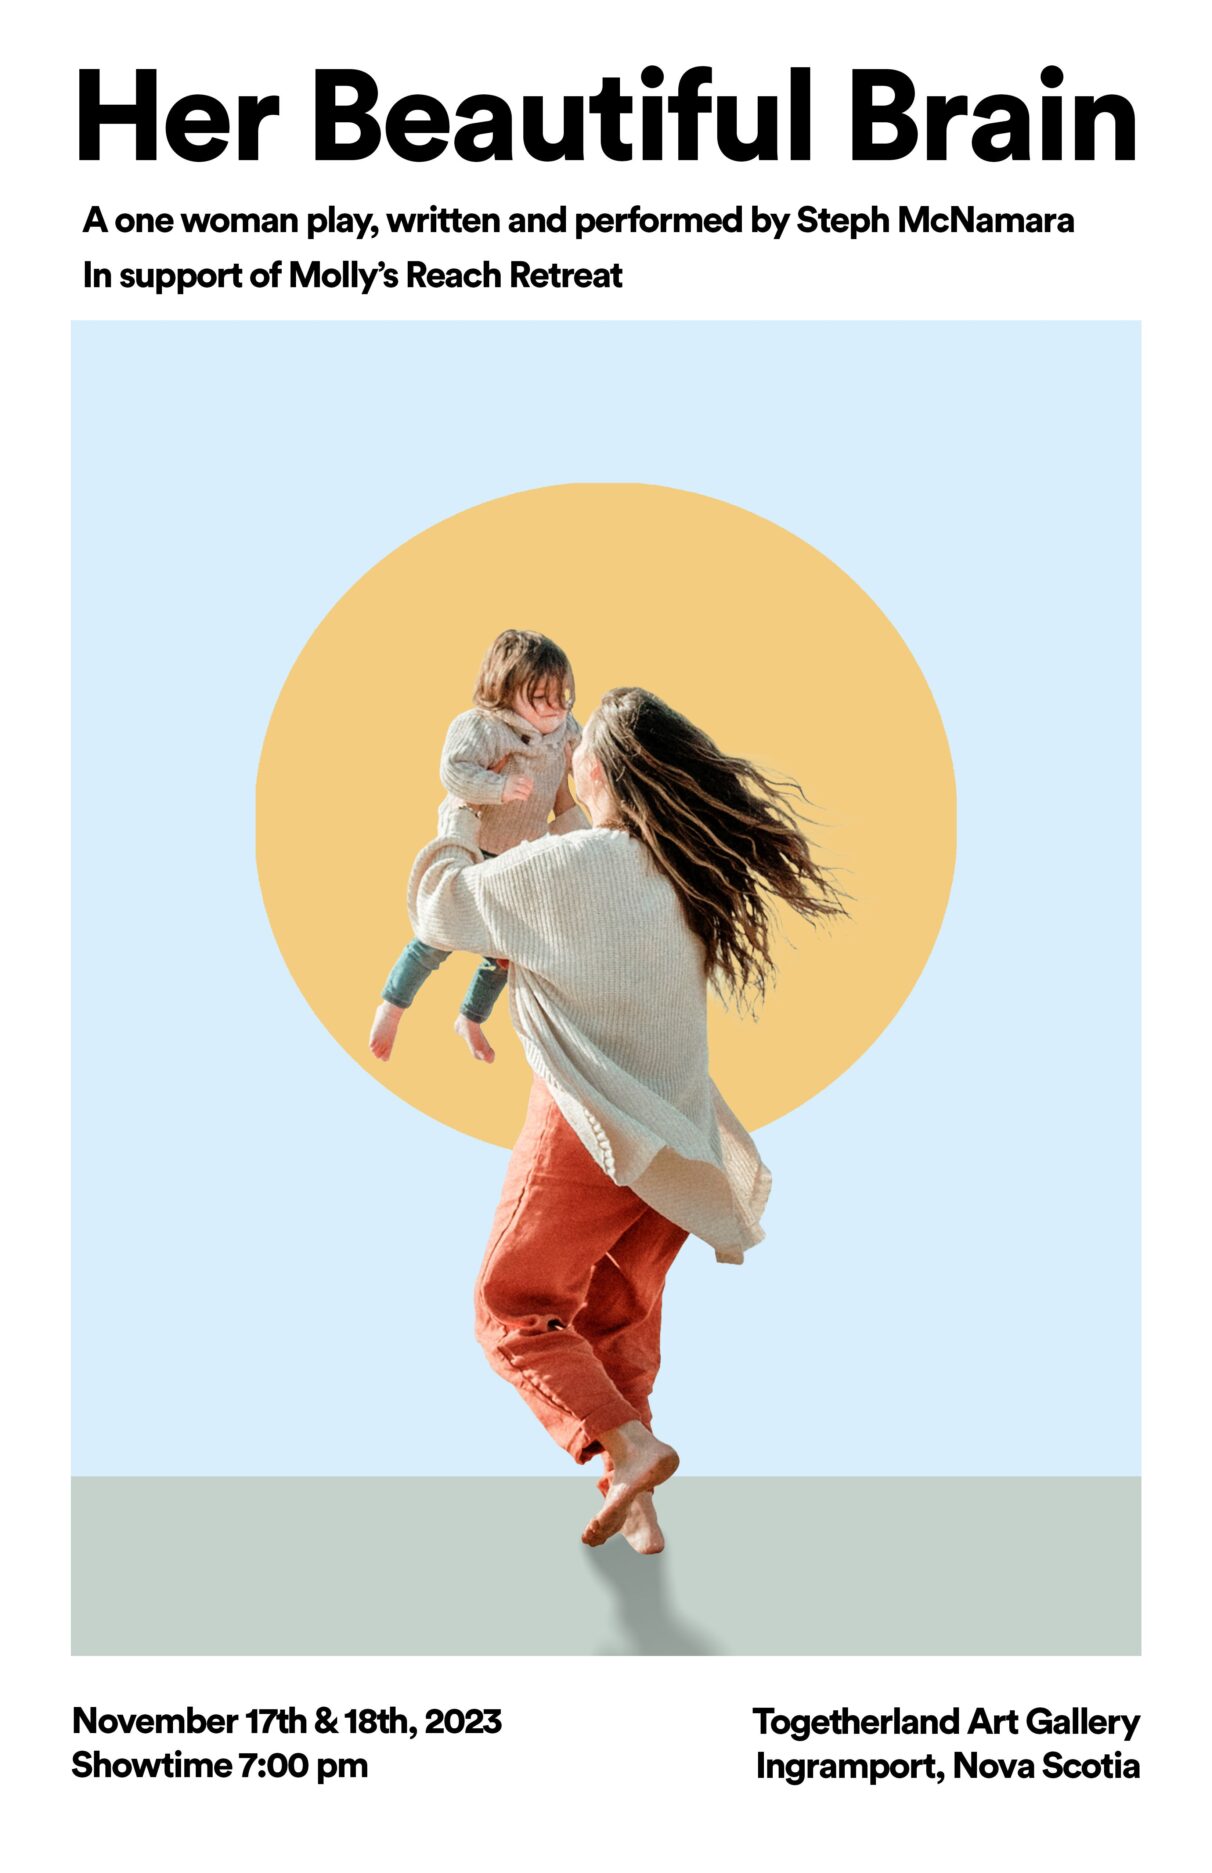 A woman swings a small child in the air.